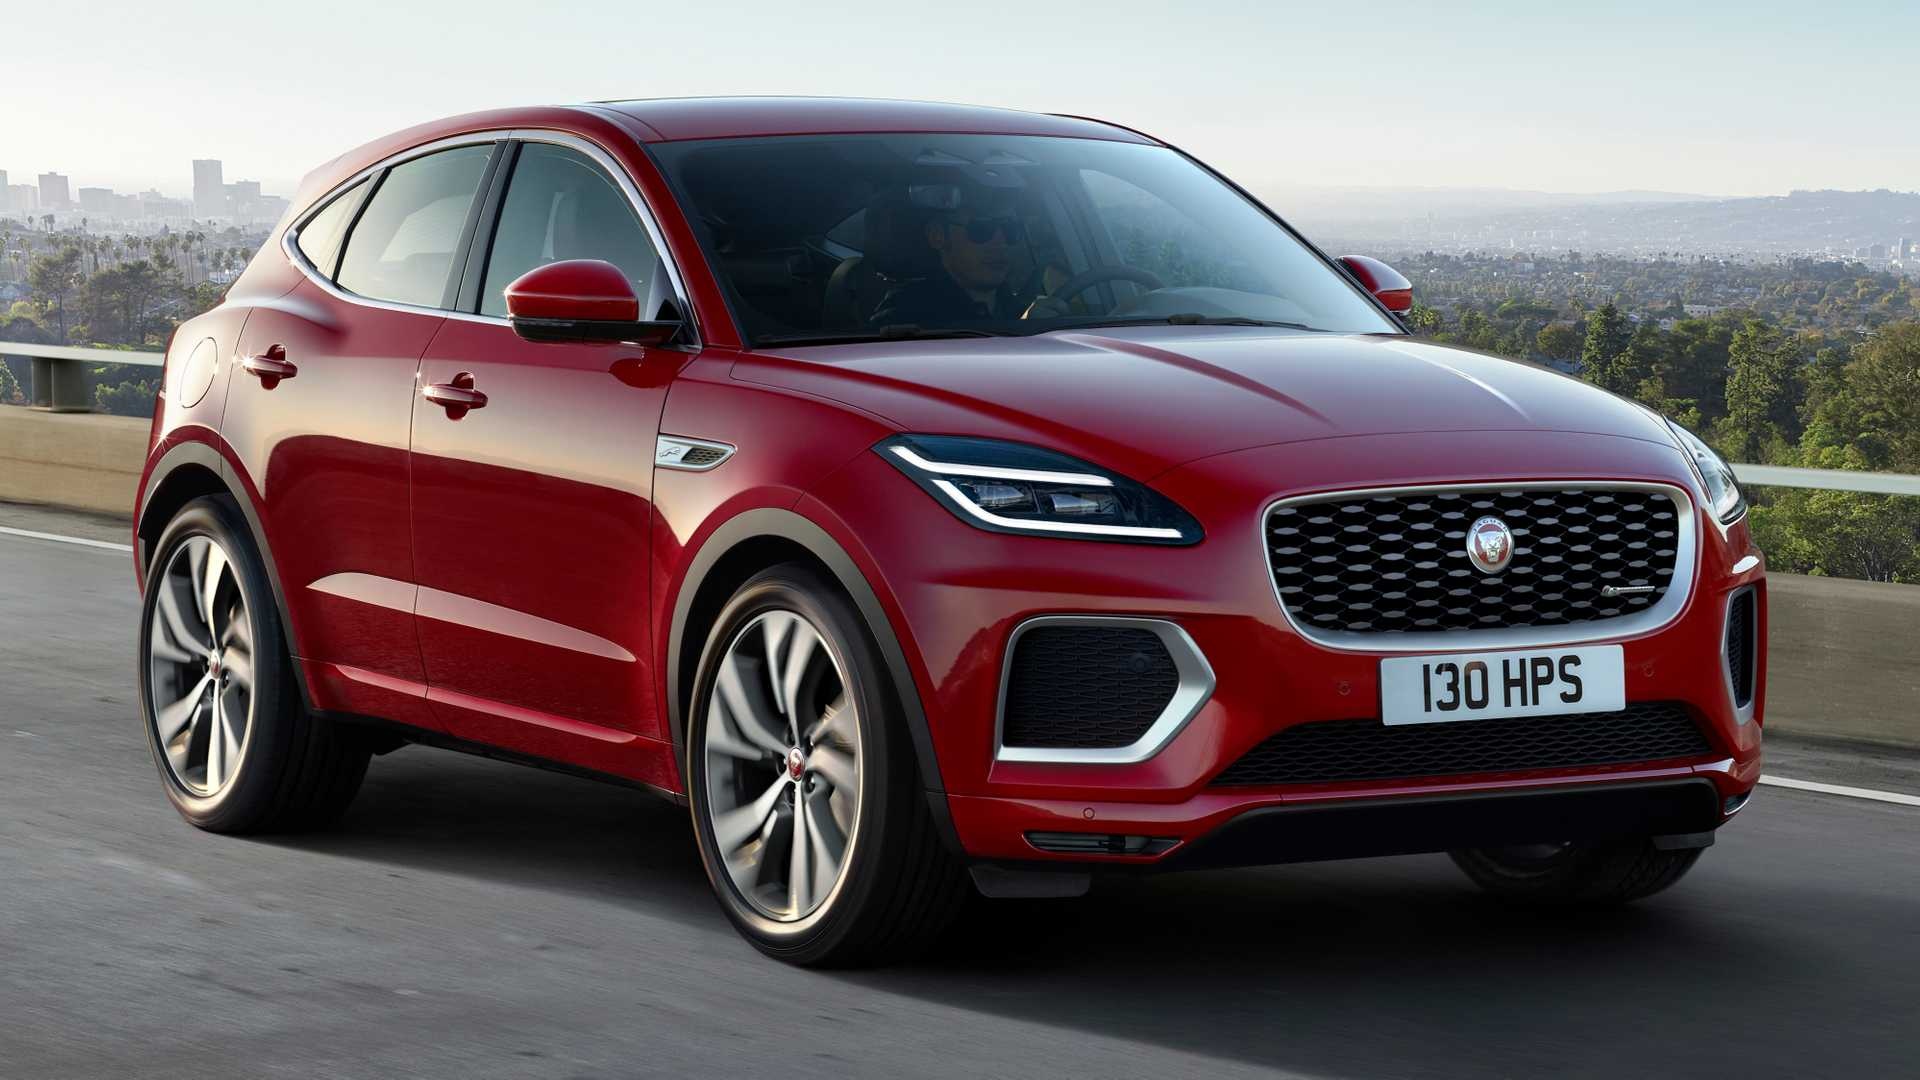 Jaguar E-PACE, Powerful and efficient, Wide range of engines, Exceptional value, 1920x1080 Full HD Desktop